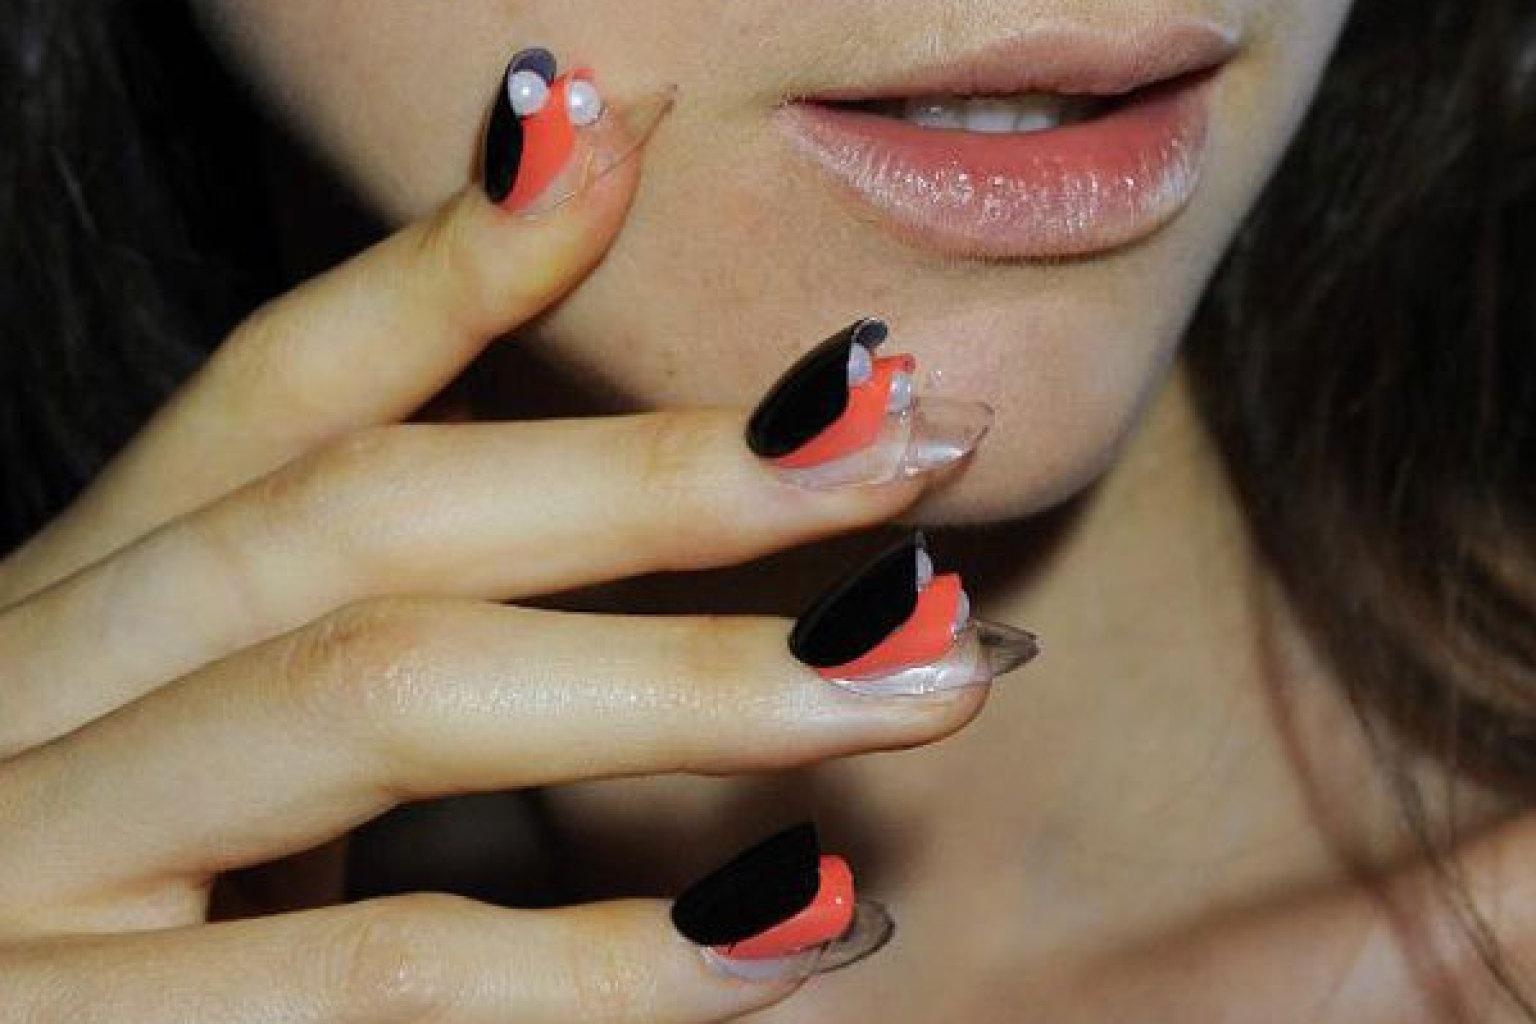 1. Cute Girl Nail Designs on Tumblr - wide 2